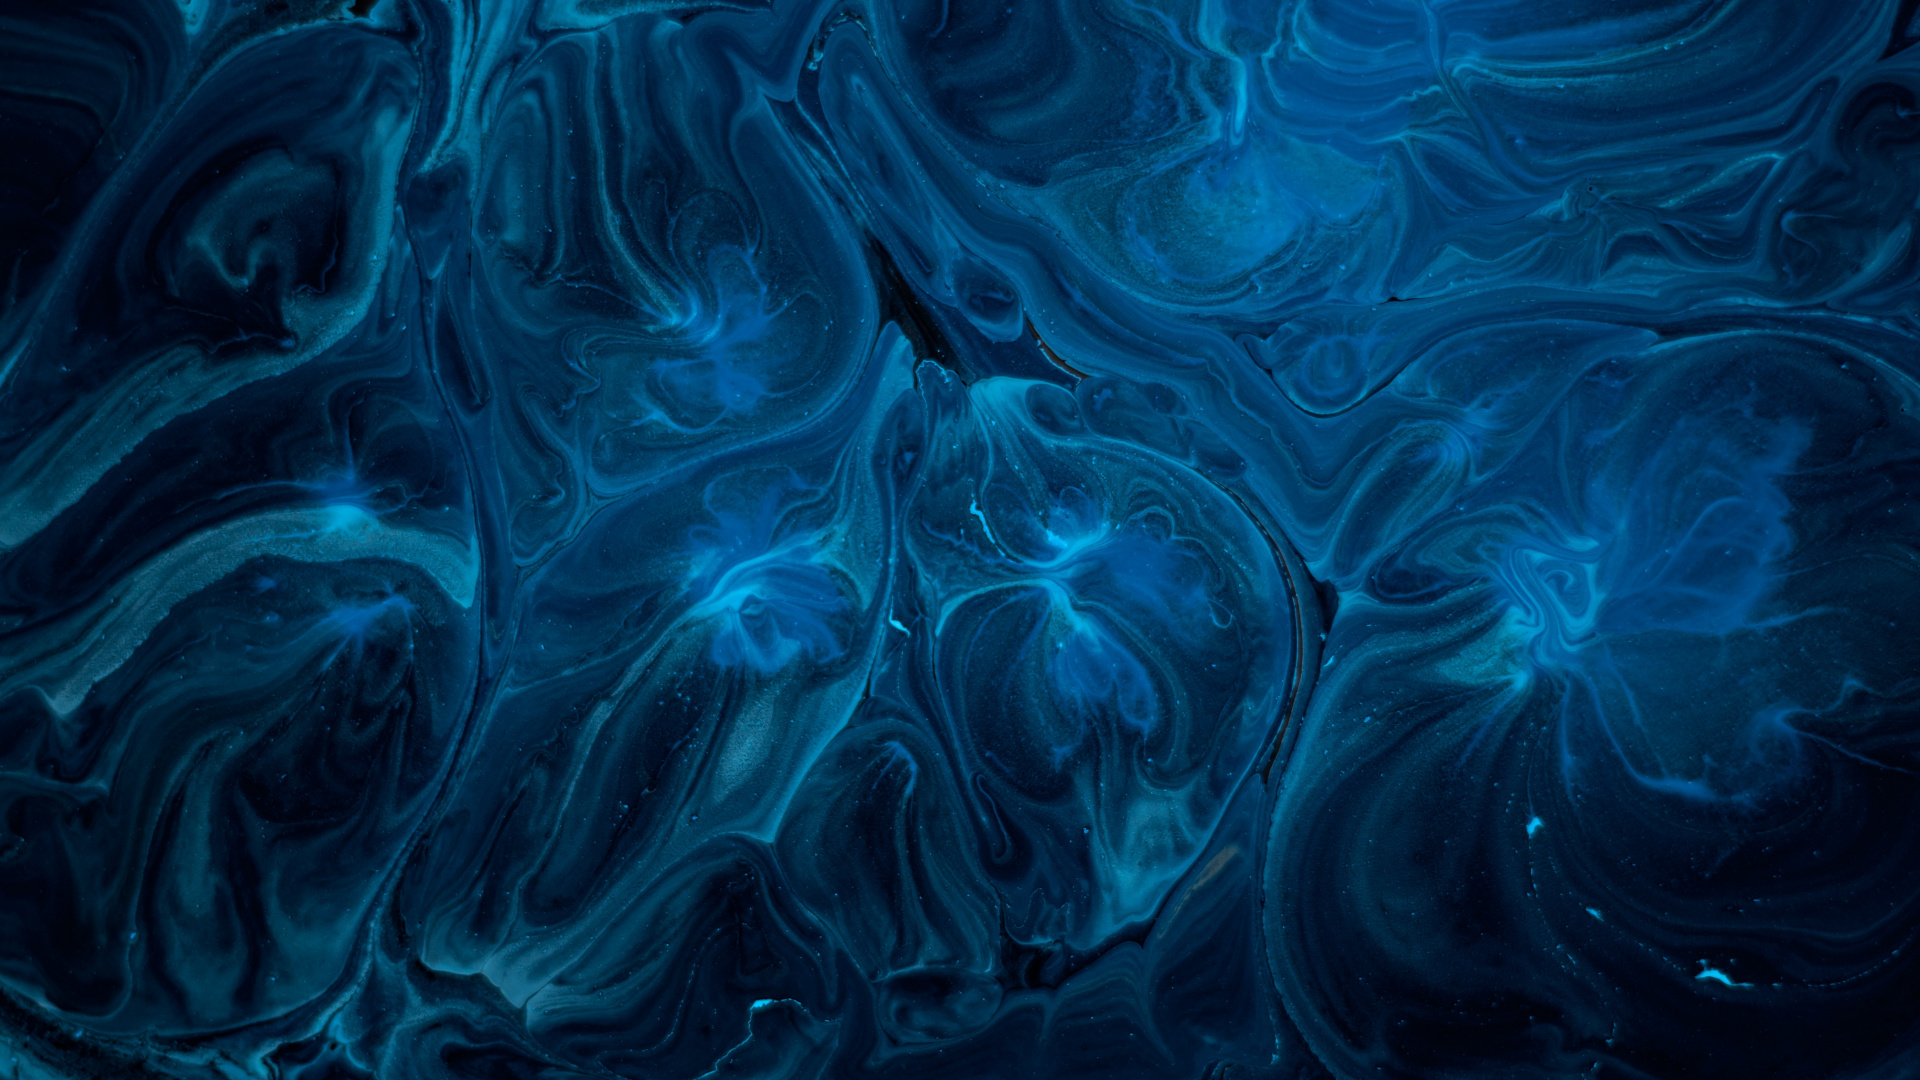 Blue and Black Abstract Painting. Wallpaper in 1920x1080 Resolution